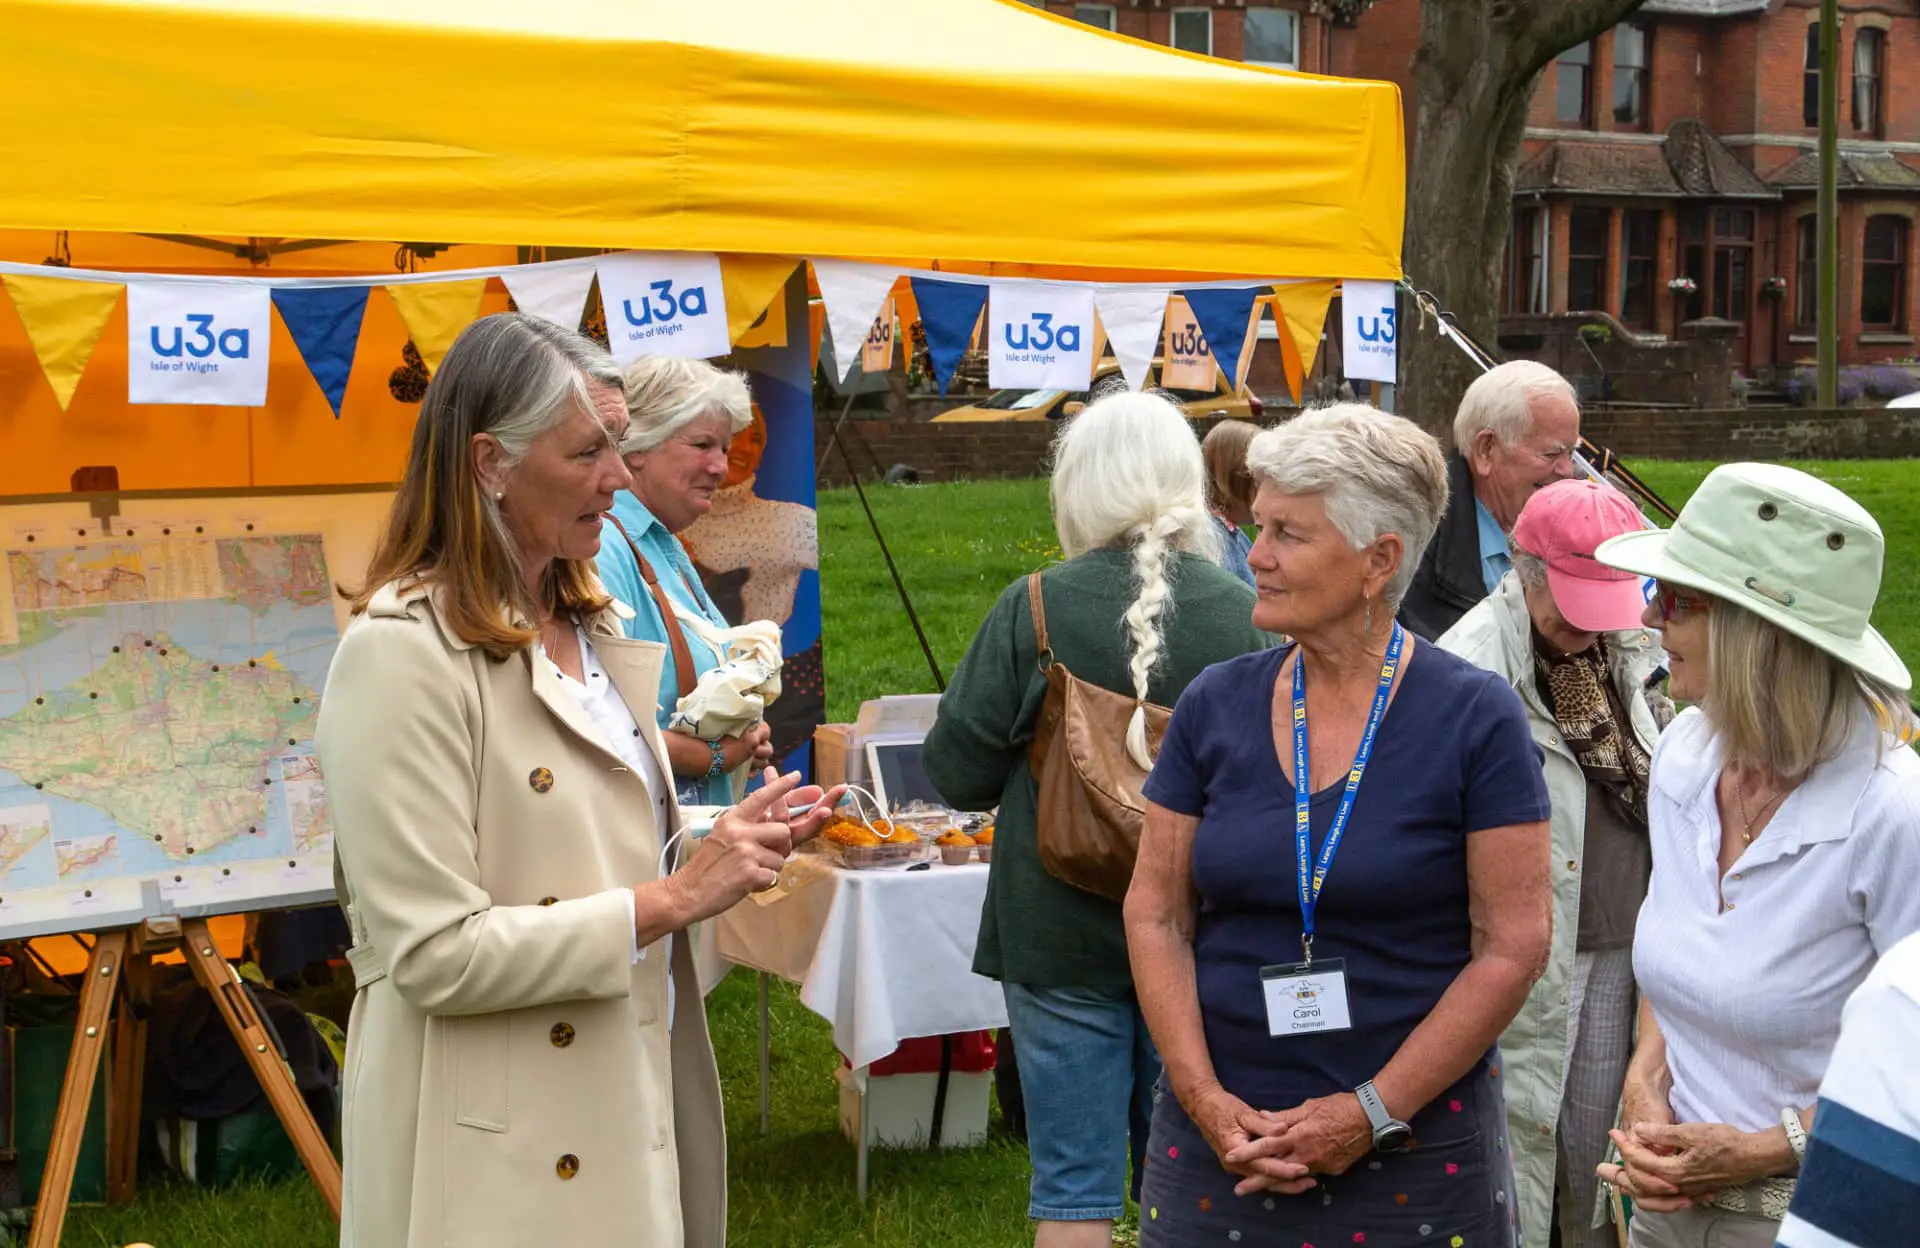 Deputy Lord Lieutenant Kate Collins meets Isle of Wight u3a members including its Chair, Carol Bradshaw in Newport on National u3a Day.